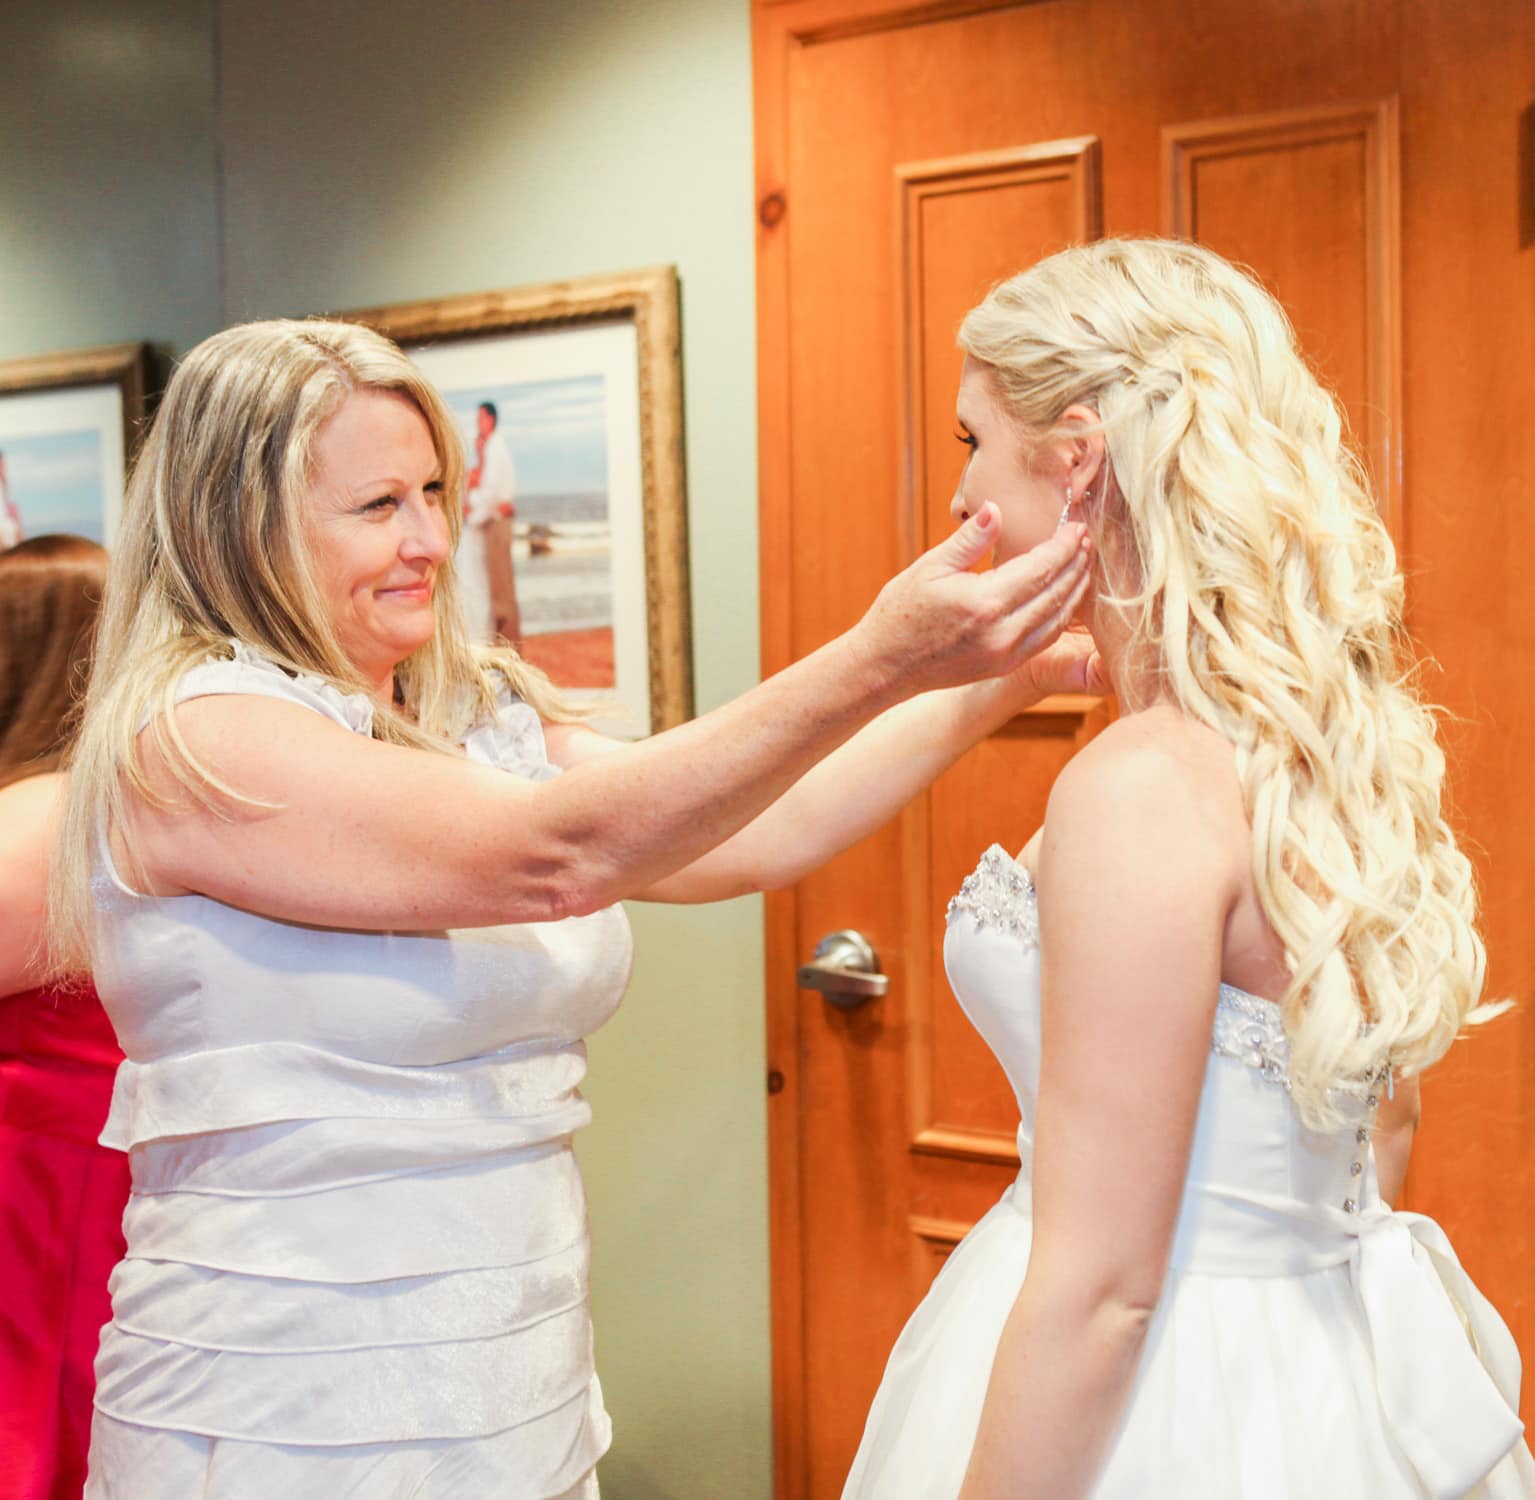 budget-wedding-ideas-what-not-to-do-at-your-wedding-touching-wedding-photo-of-mother-daughter-046